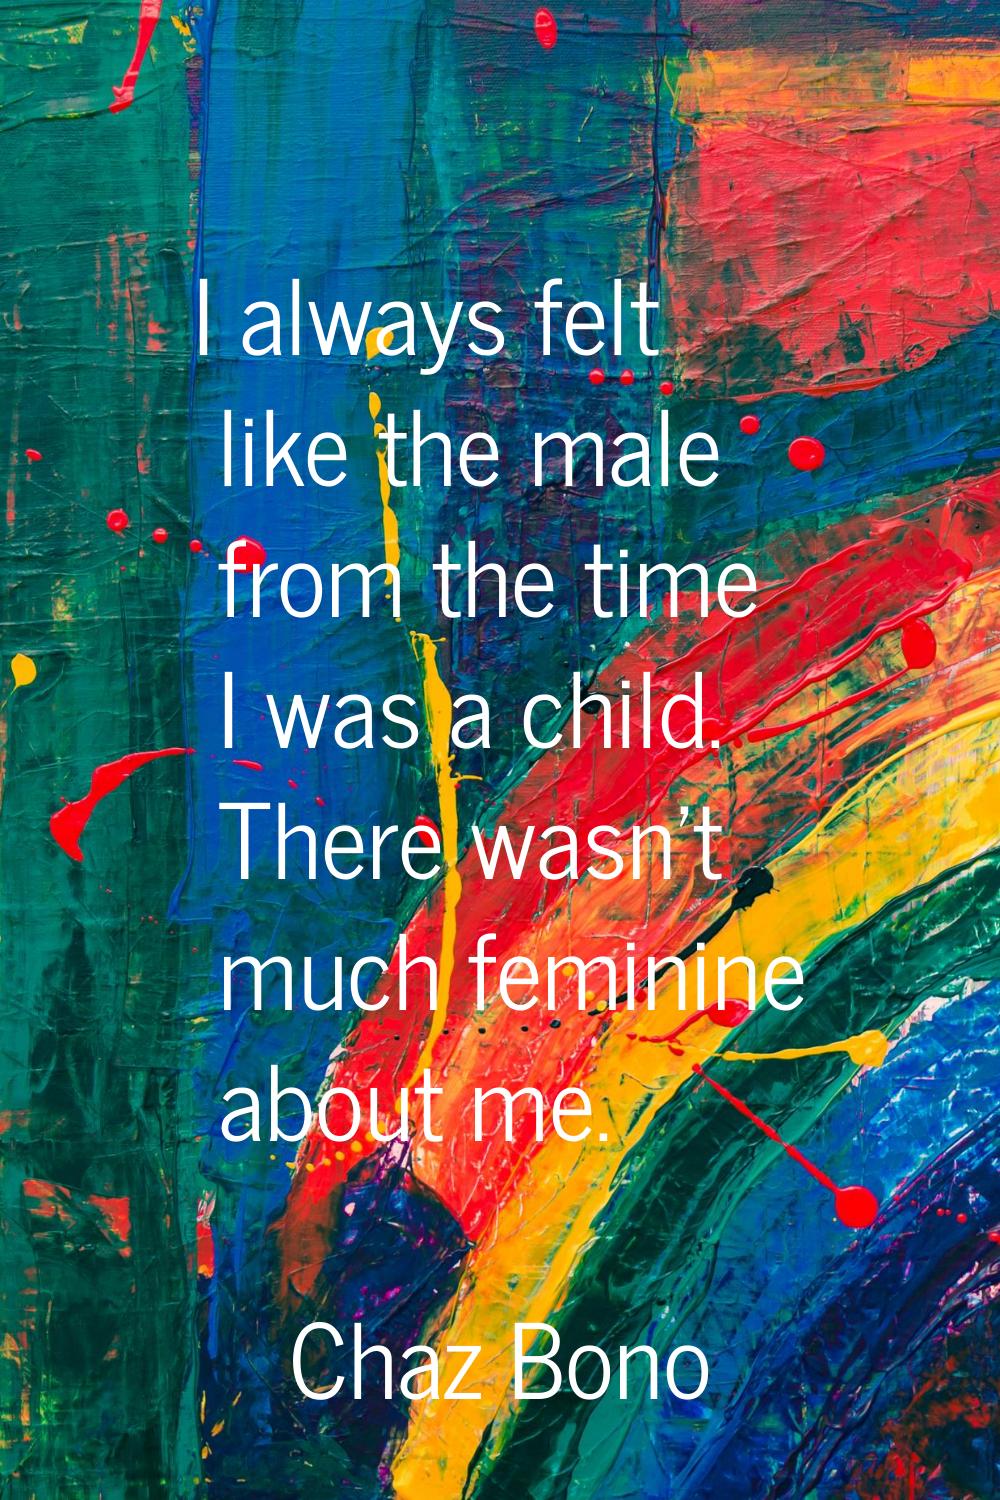 I always felt like the male from the time I was a child. There wasn't much feminine about me.